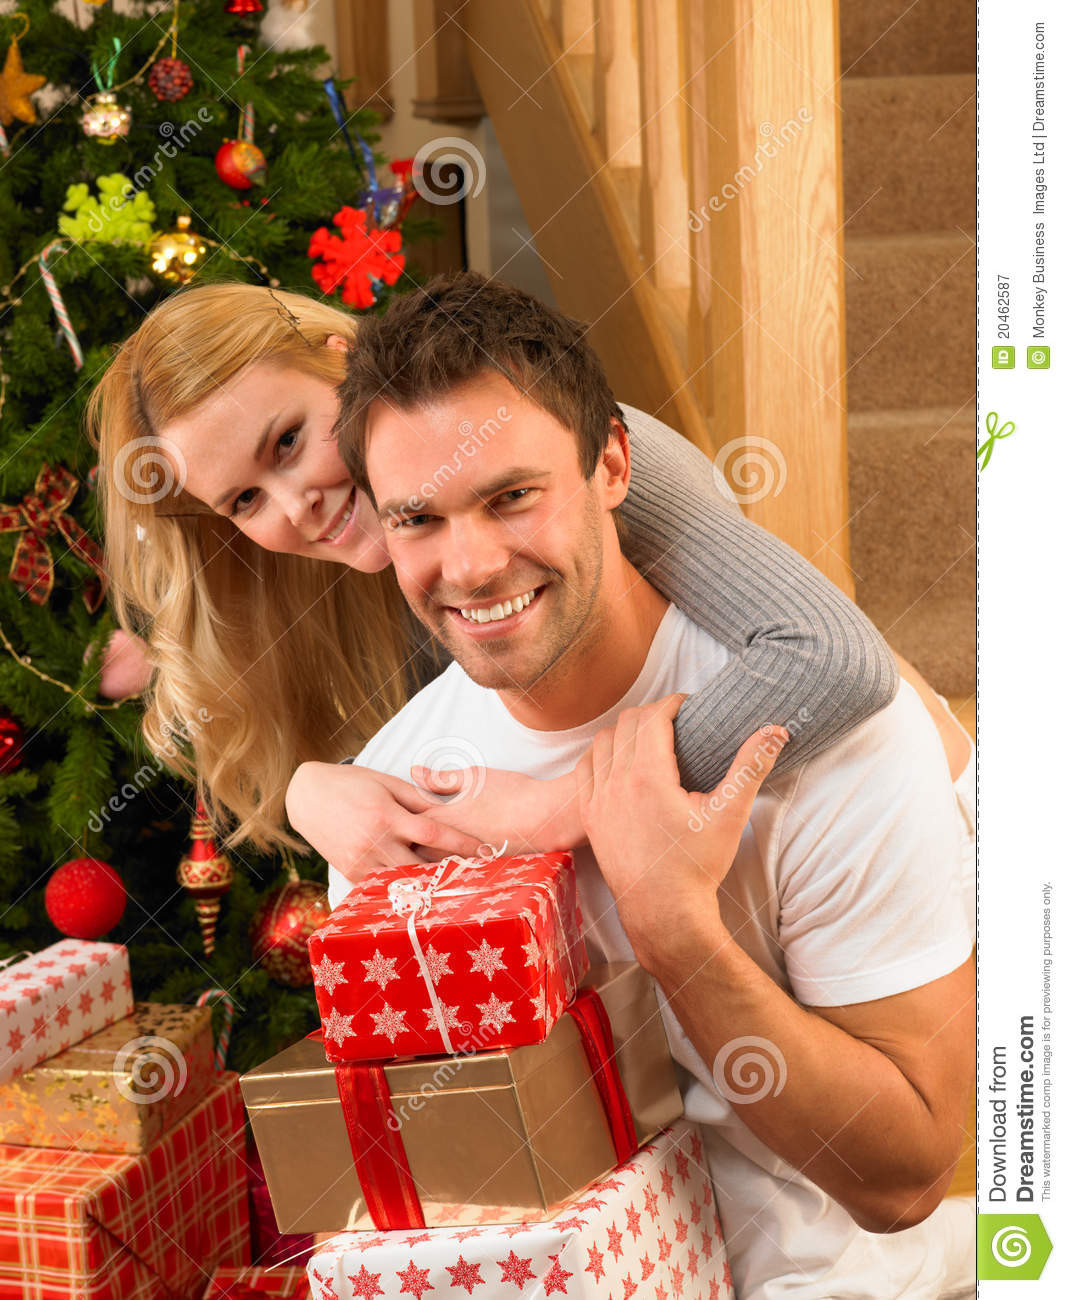 Christmas Gift Ideas Young Couple
 Young Couple At Christmas Exchanging Gifts Royalty Free